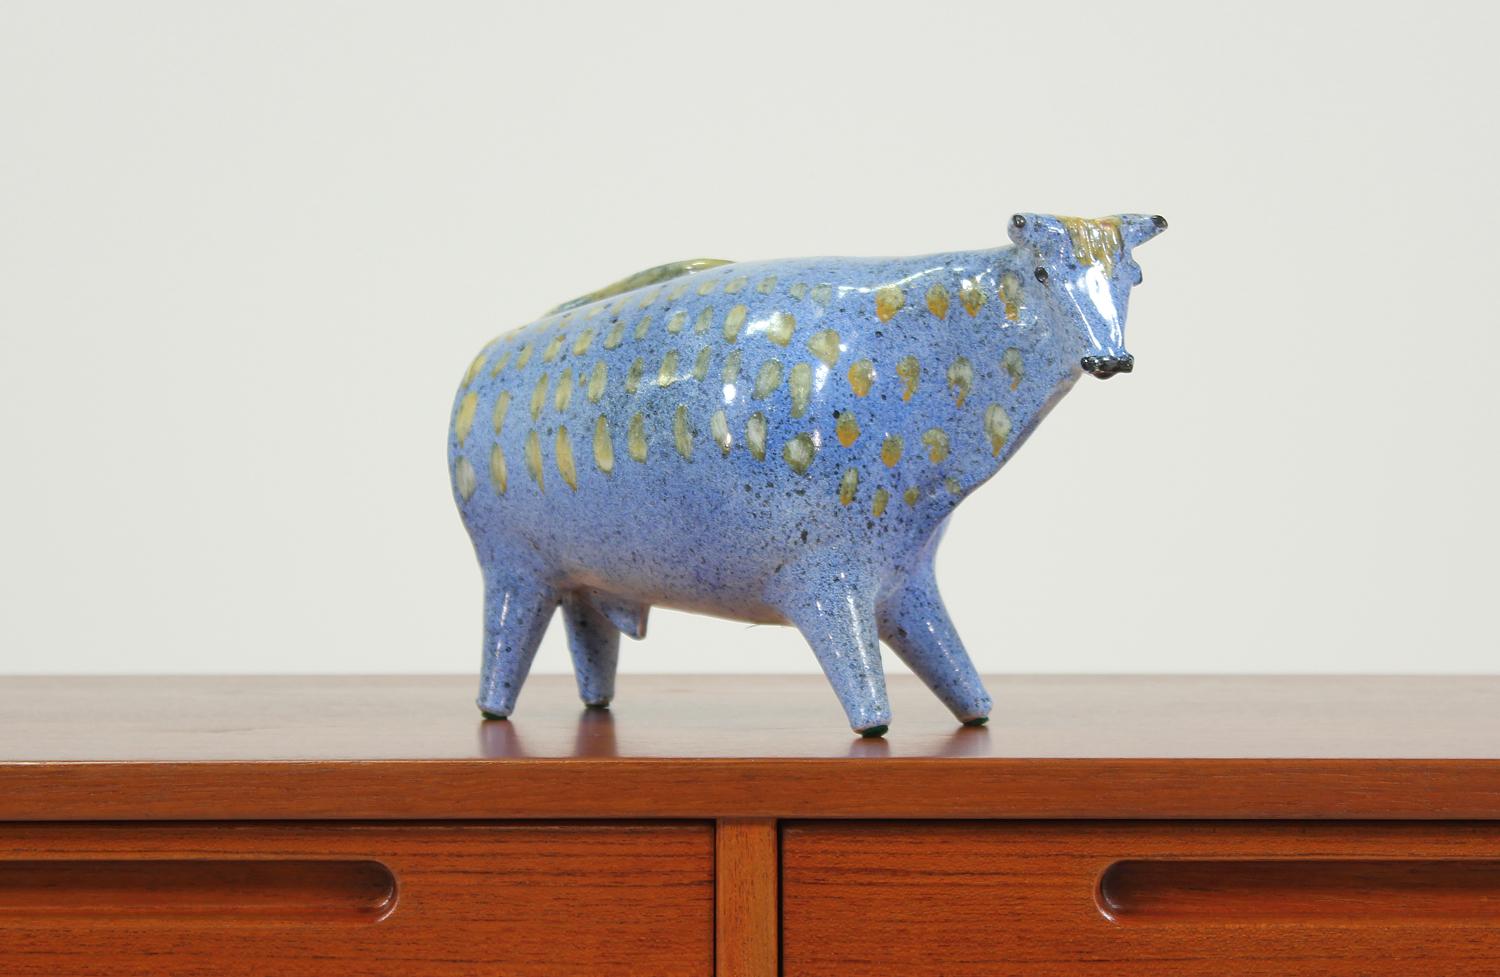 Fine bull sculpture designed and manufactured by Alfaraz in Spain circa 1950’s. This artistic bull sculpture is in excellent condition showing minor wear from use. A wonderfully preserved item made of ceramic painted with in speckled blue and hand